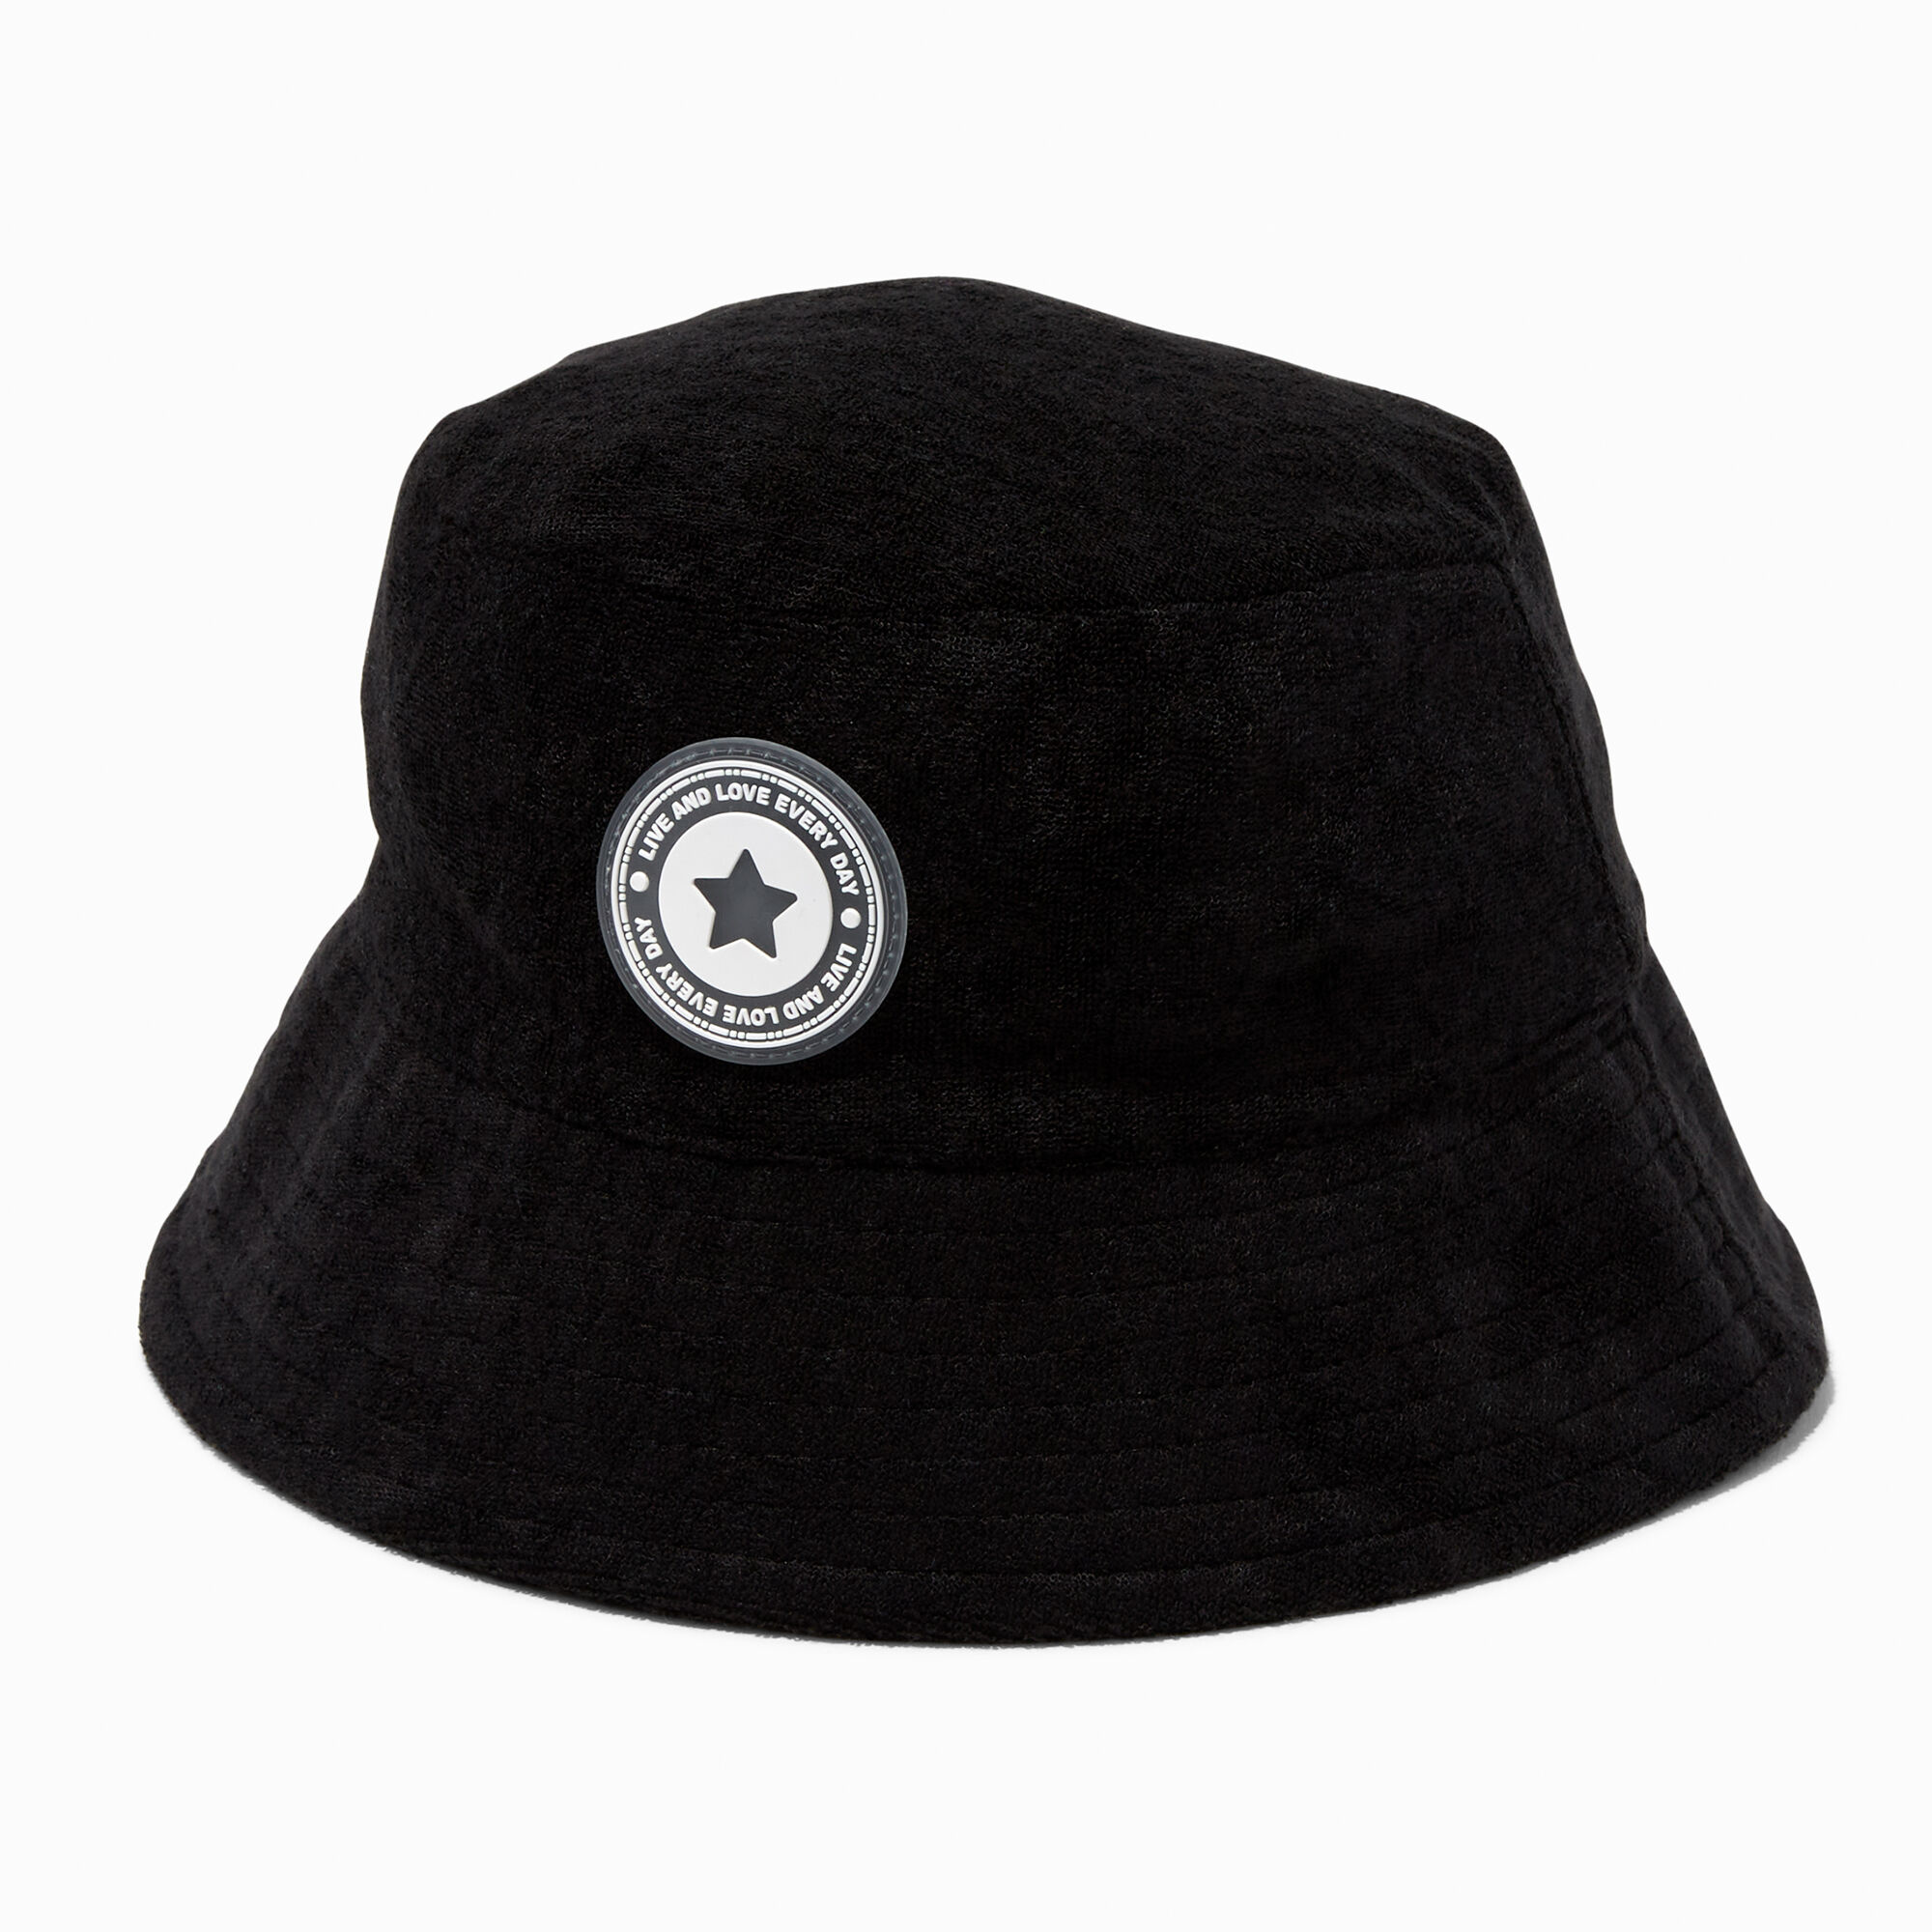 View Claires Sporty Bucket Hat Black information